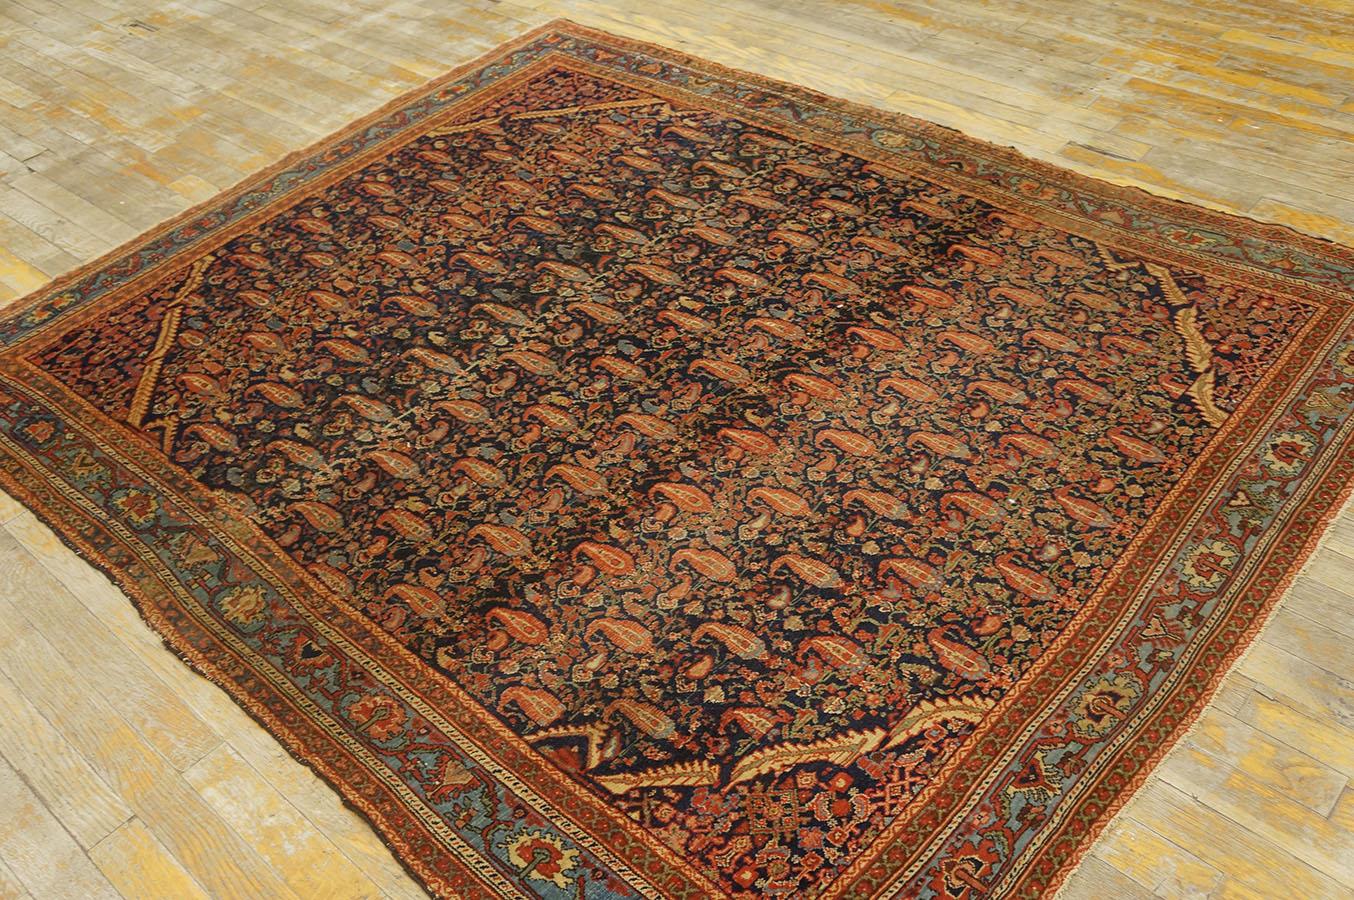 Wool Late 19th Century Persian Malayer Carpet ( 5' x 6' 2'' - 152 x 188 cm ) For Sale